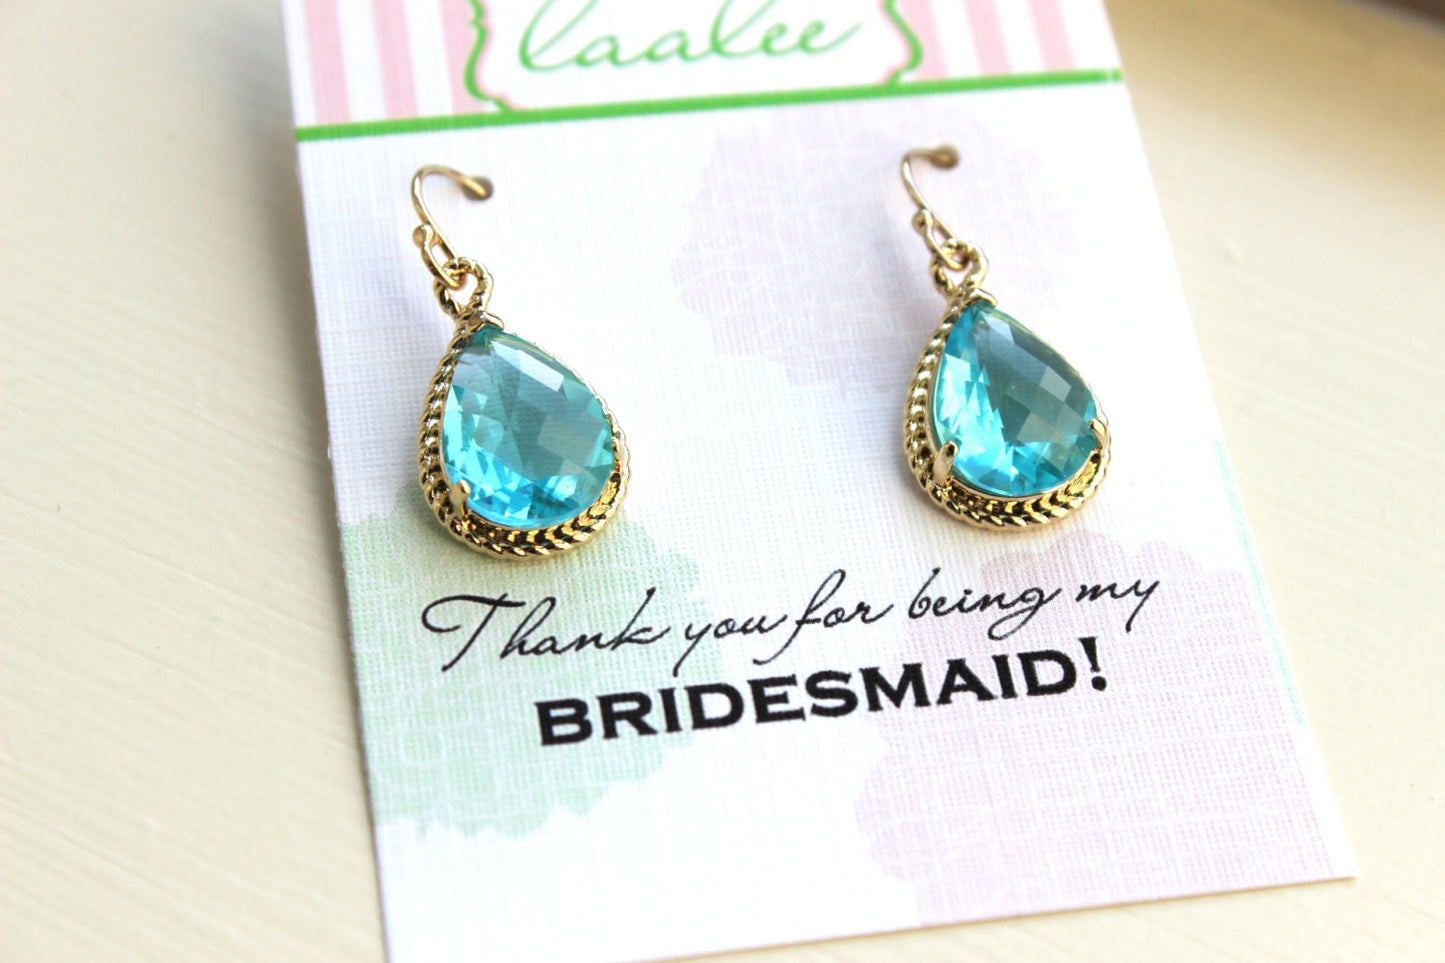 Aquamarine Earrings Gold Blue Earrings - Bridesmaid Thank You Card - Thank you for being my bridesmaid - Blue Topaz Bridal Wedding Jewelry